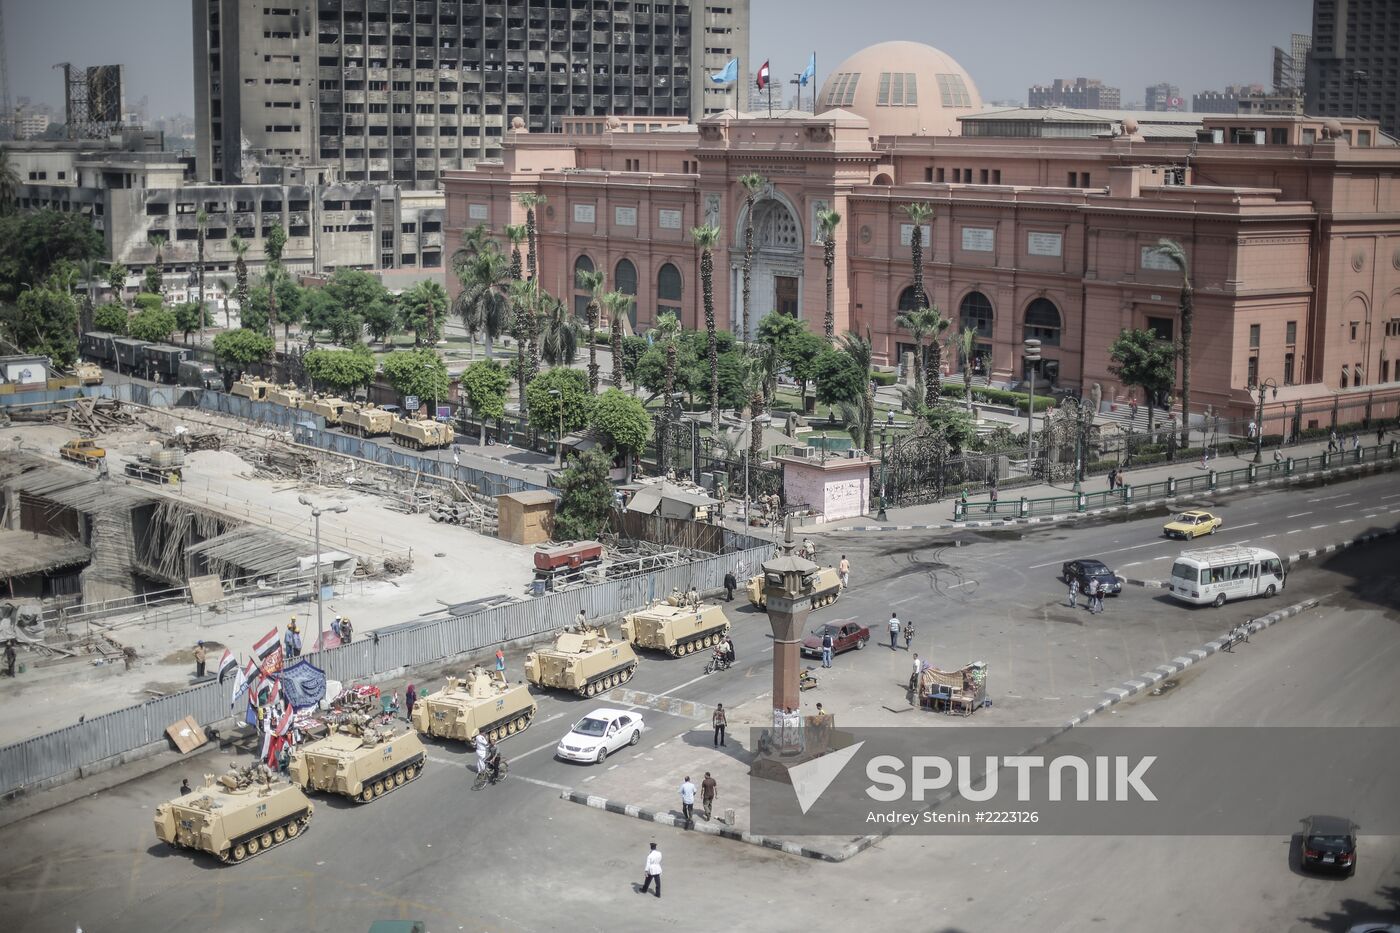 Situation in Cairo